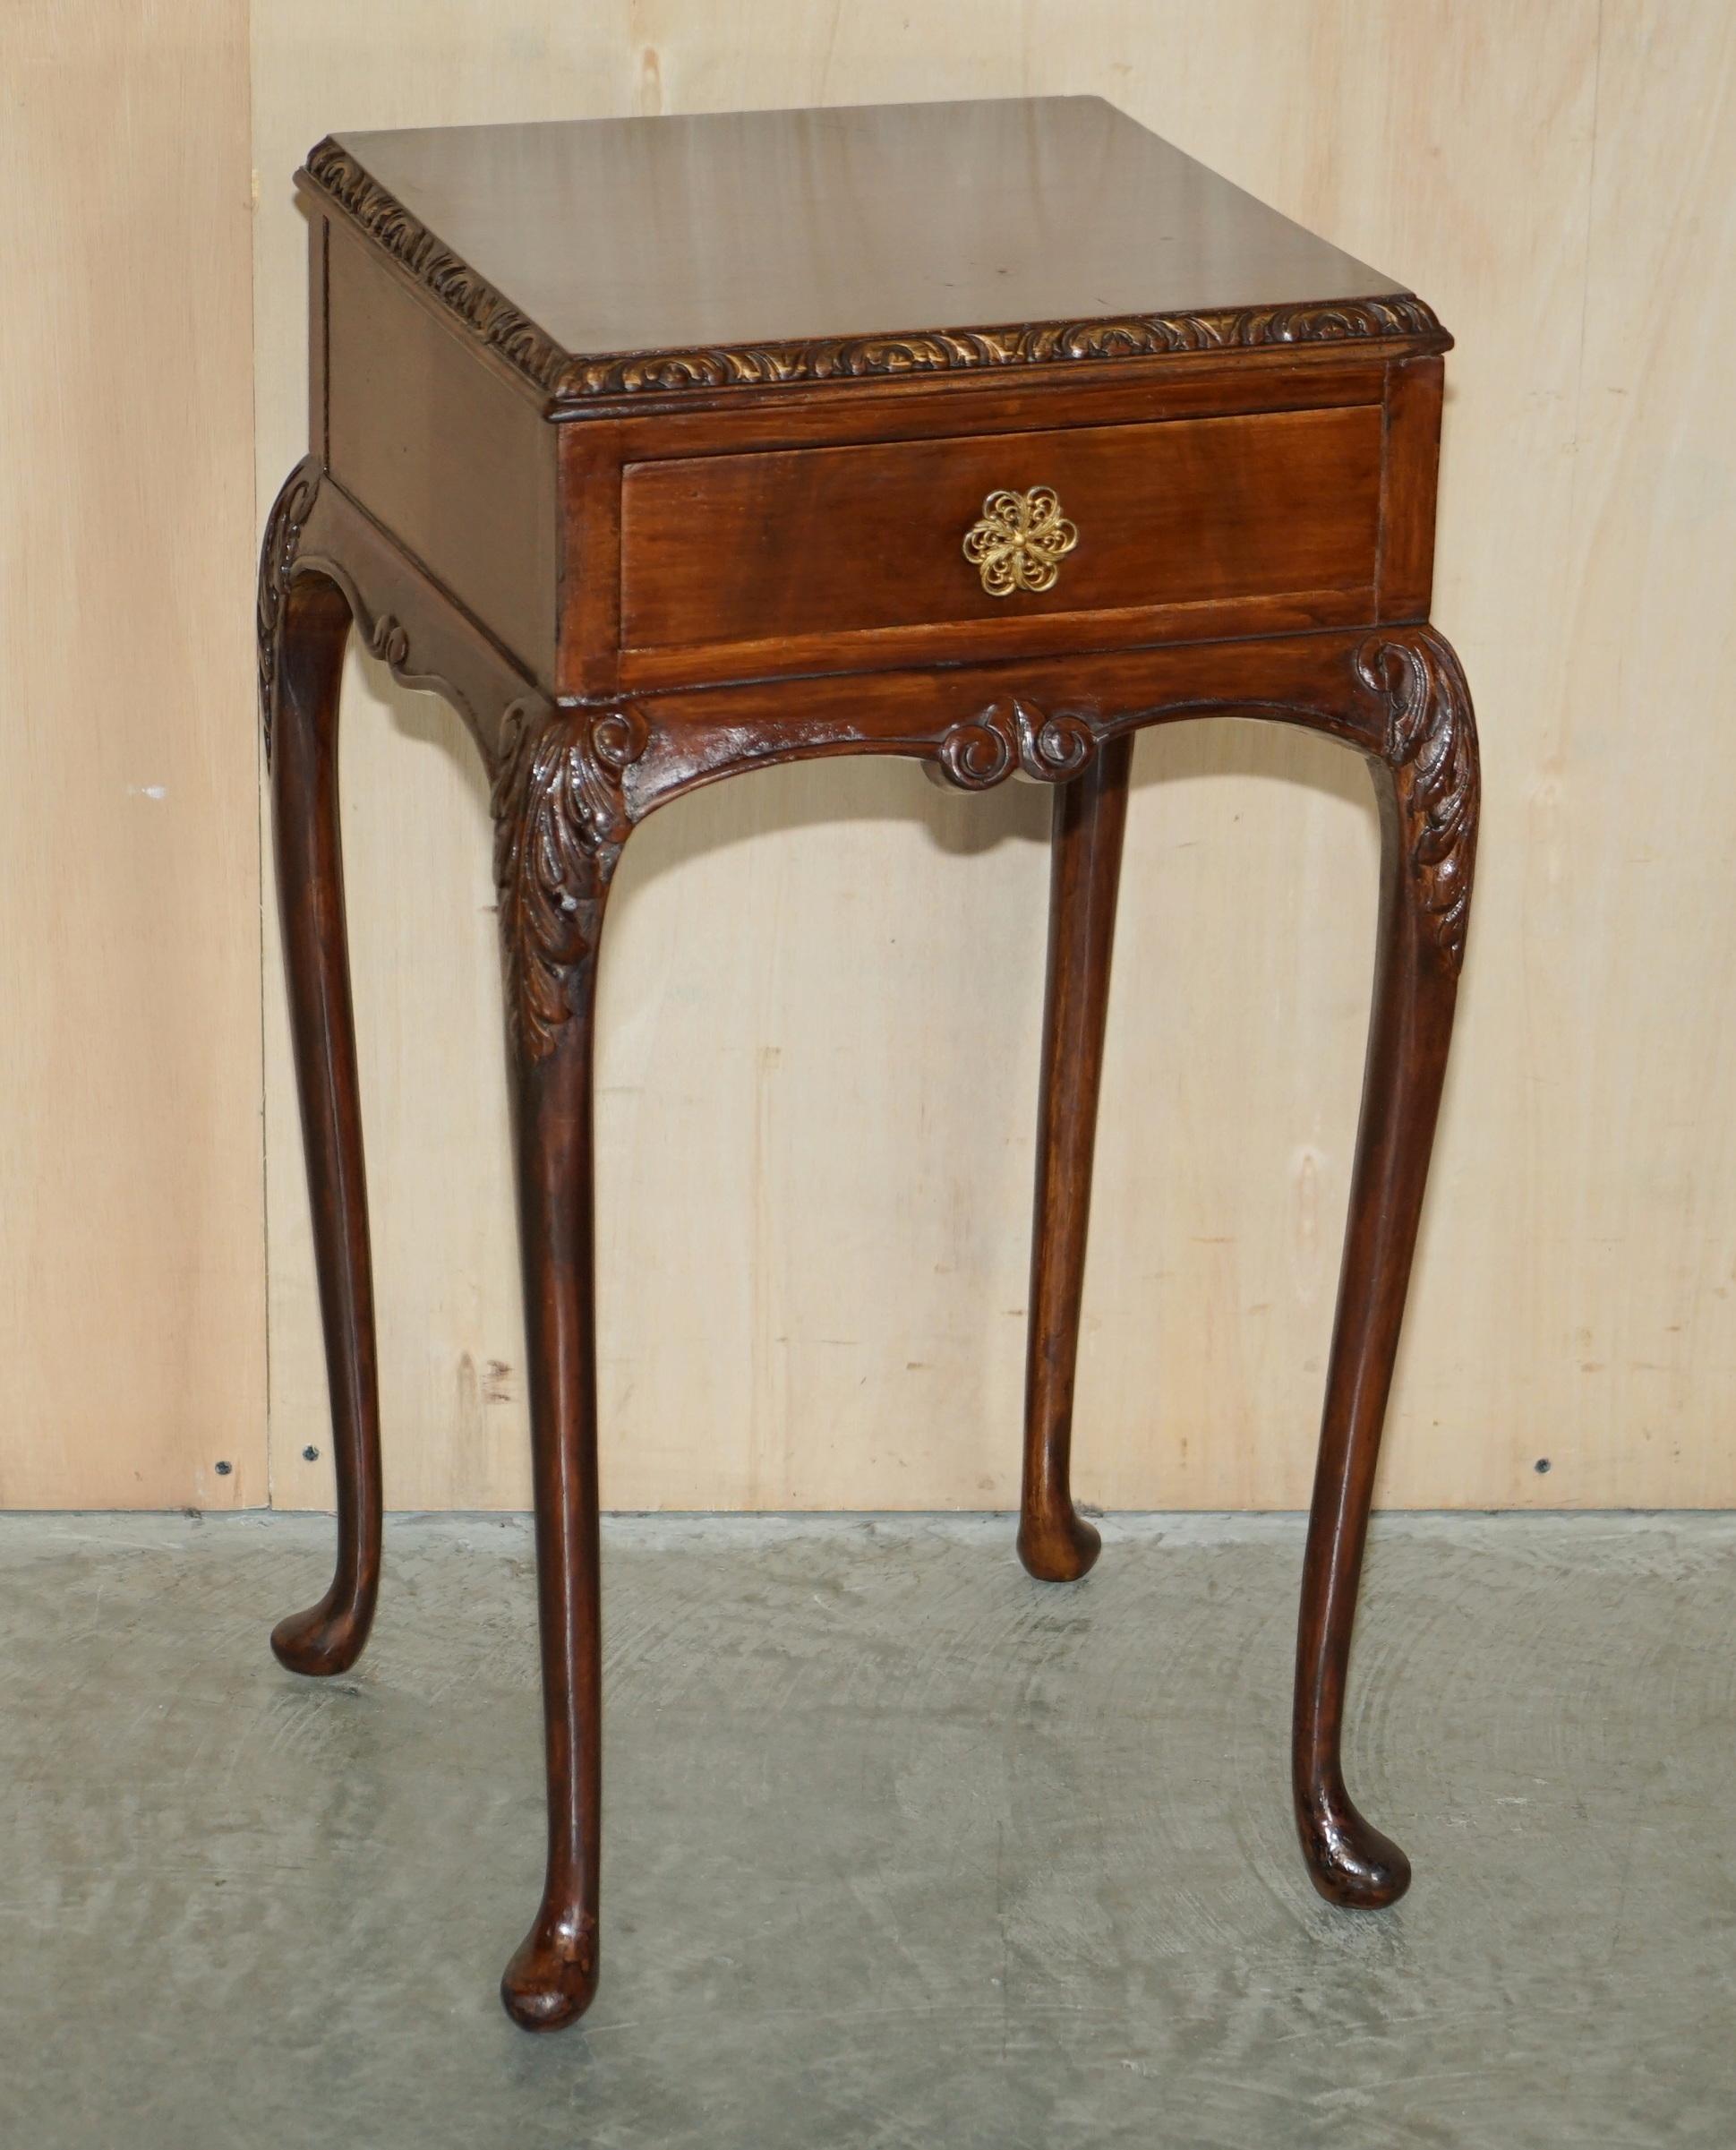 Royal House Antiques

Royal House Antiques is delighted to offer for sale this stunning pair of Antique Victorian mahogany single drawer tall side tables with ornate handles

Please note the delivery fee listed is just a guide, it covers within the